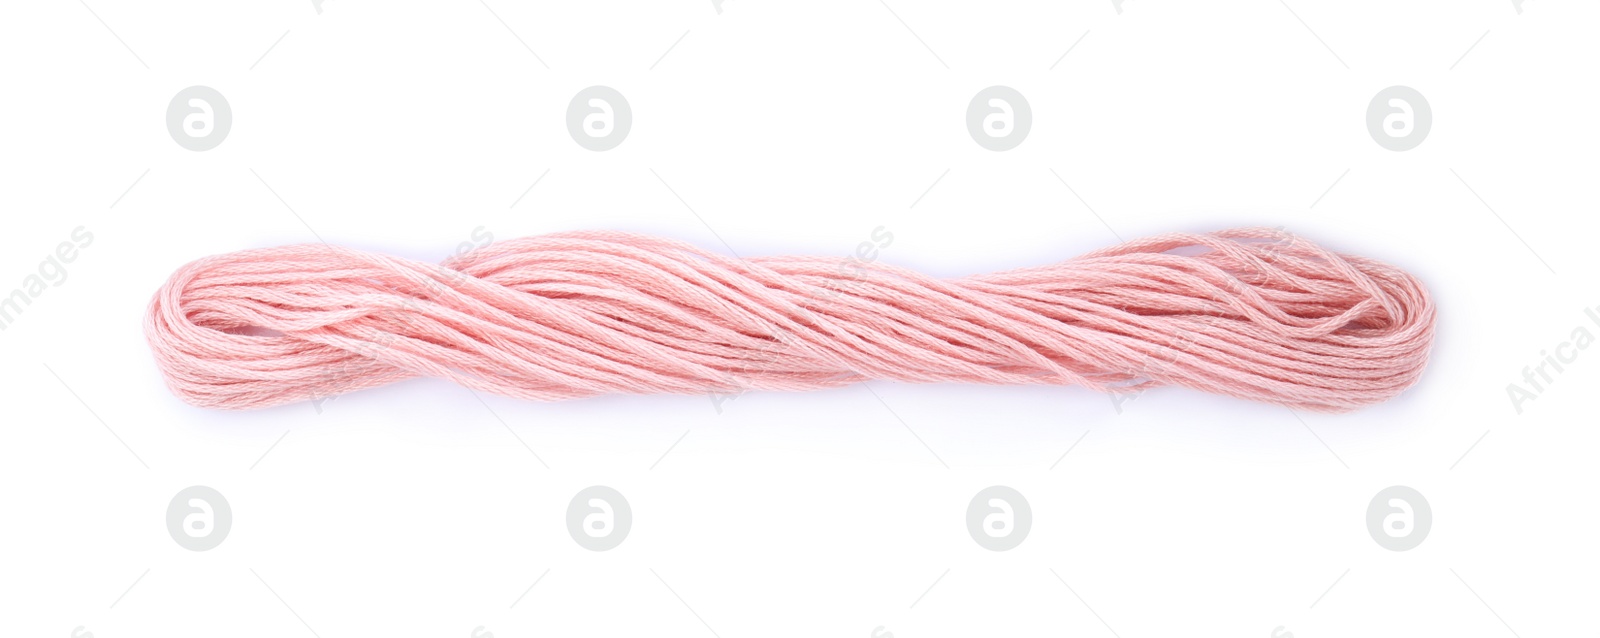 Photo of Bright pink embroidery thread on white background